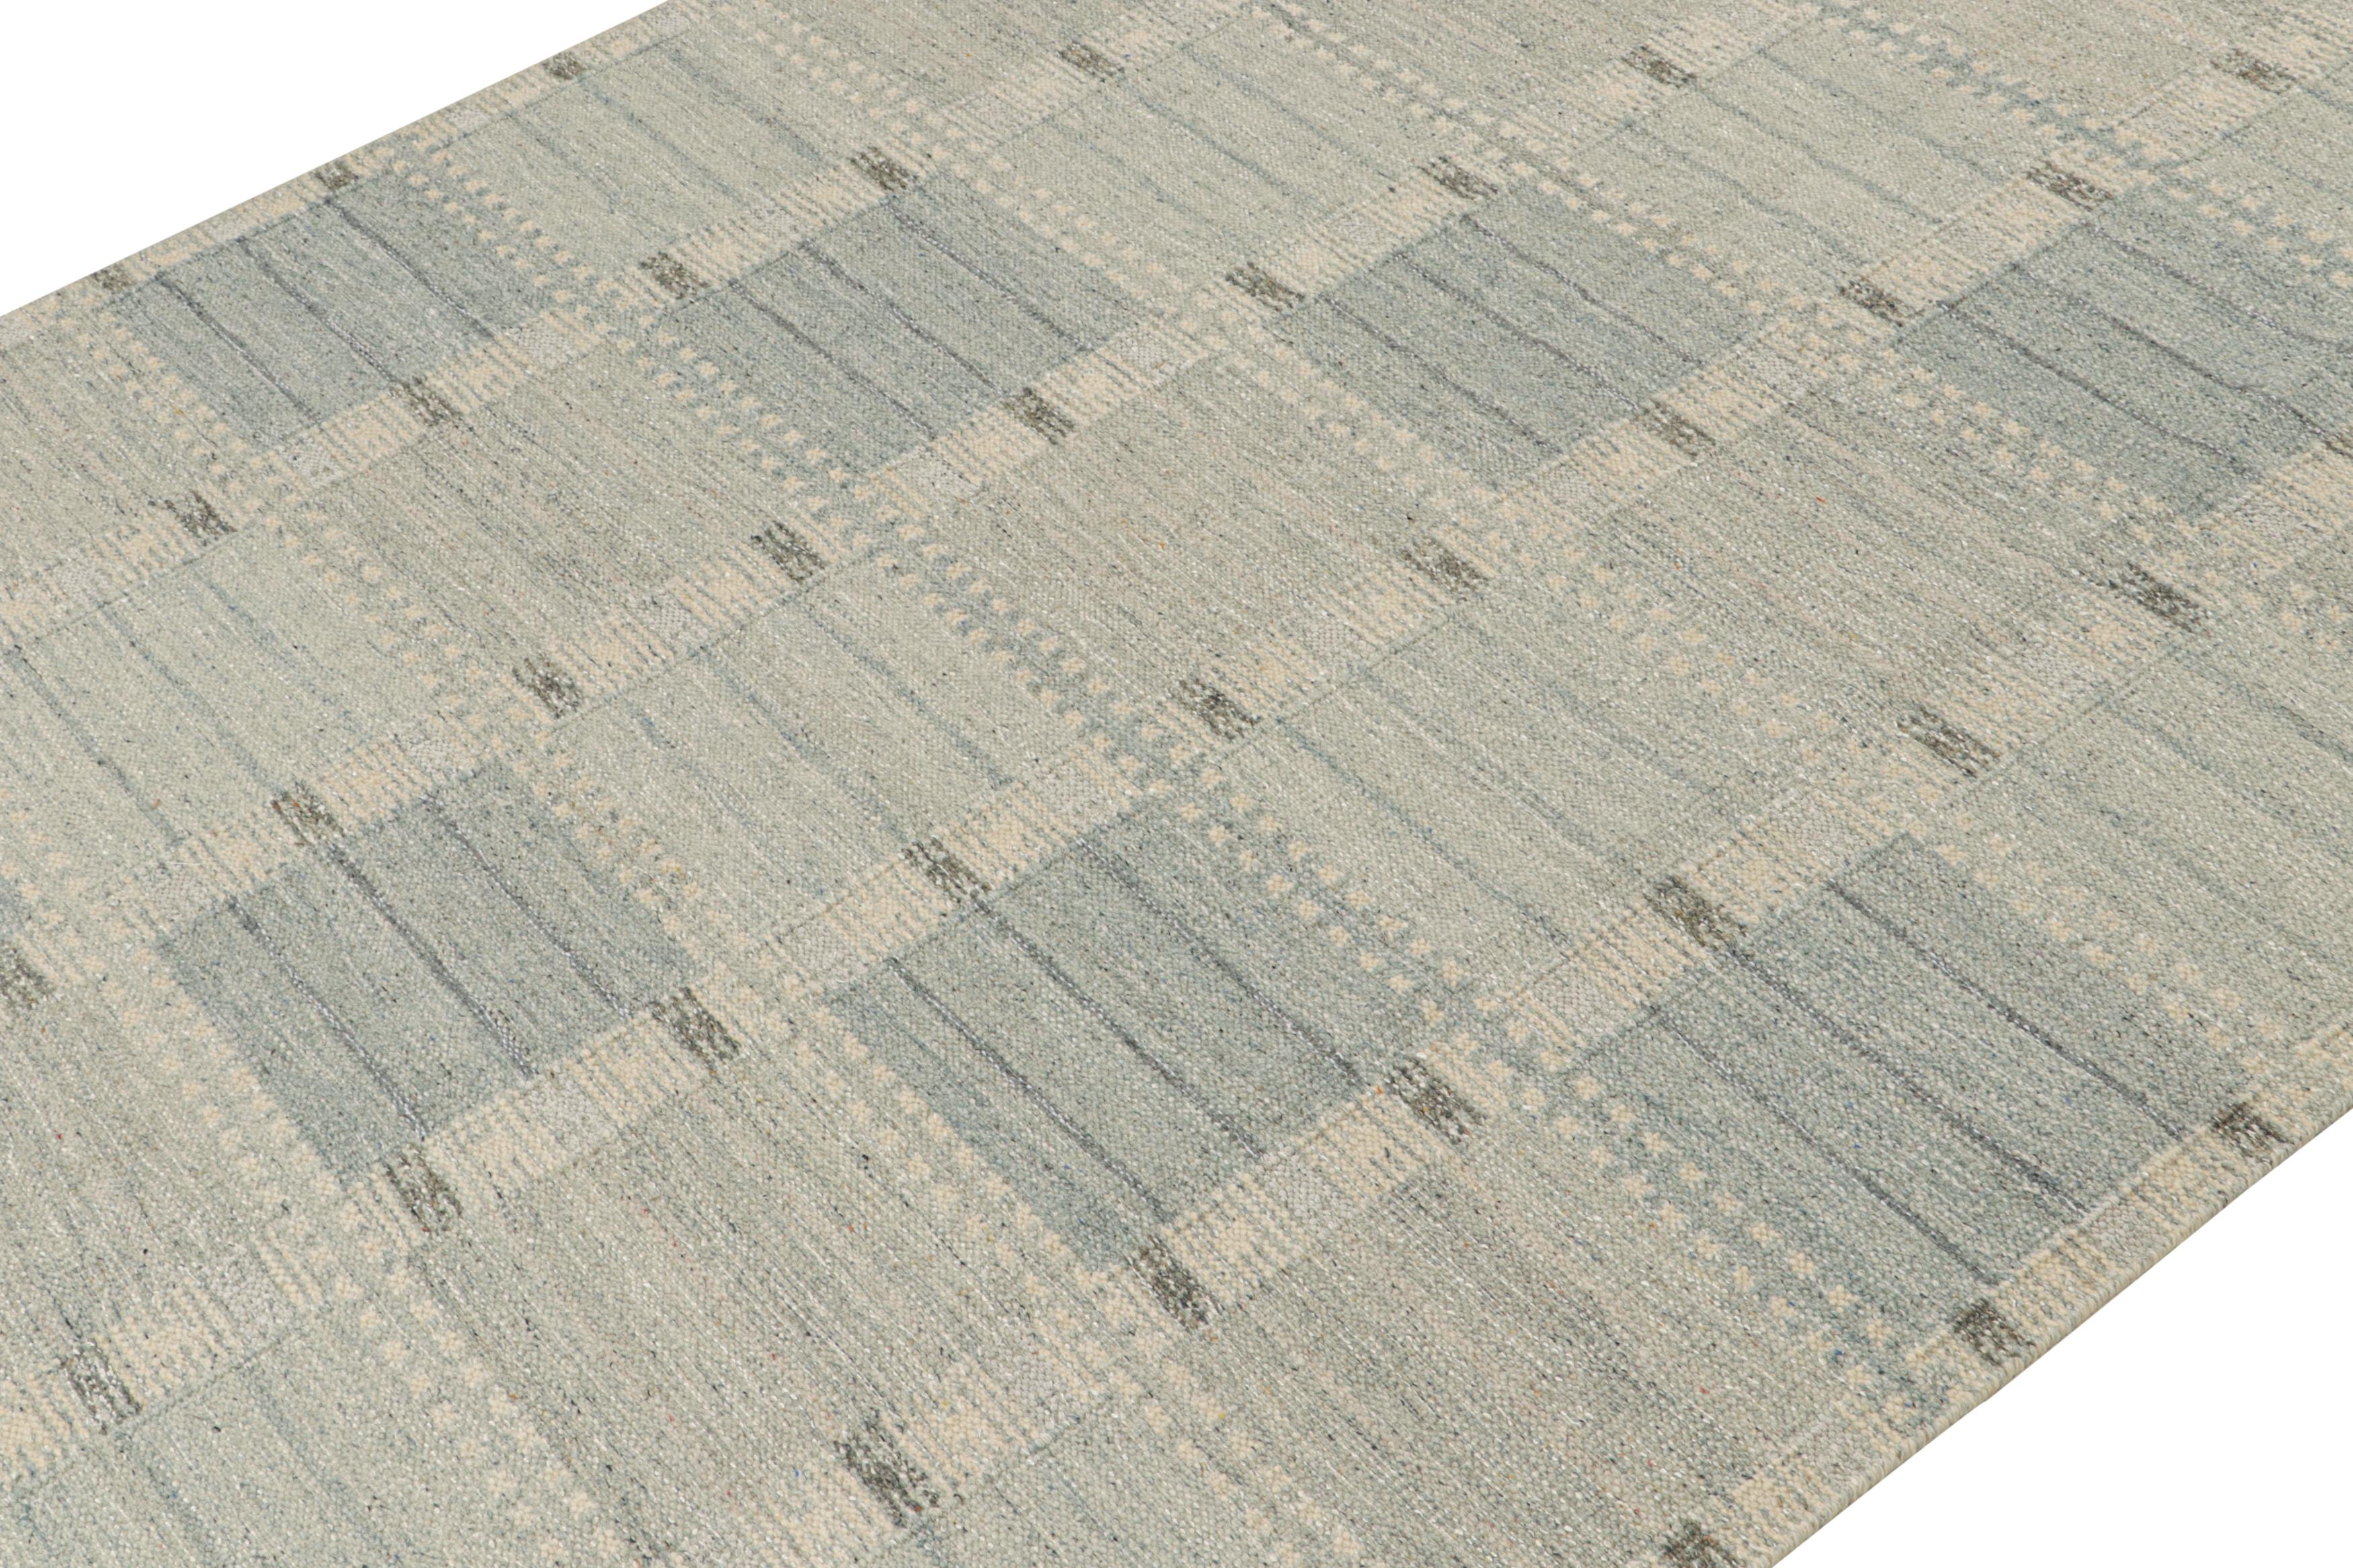 This 8x10 flat weave is a new addition to the Scandinavian Kilim collection by Rug & Kilim. Handwoven in wool and natural yarns, its design reflects a contemporary take on mid-century Rollakans and Swedish Deco style.
On the Design:

This new flat